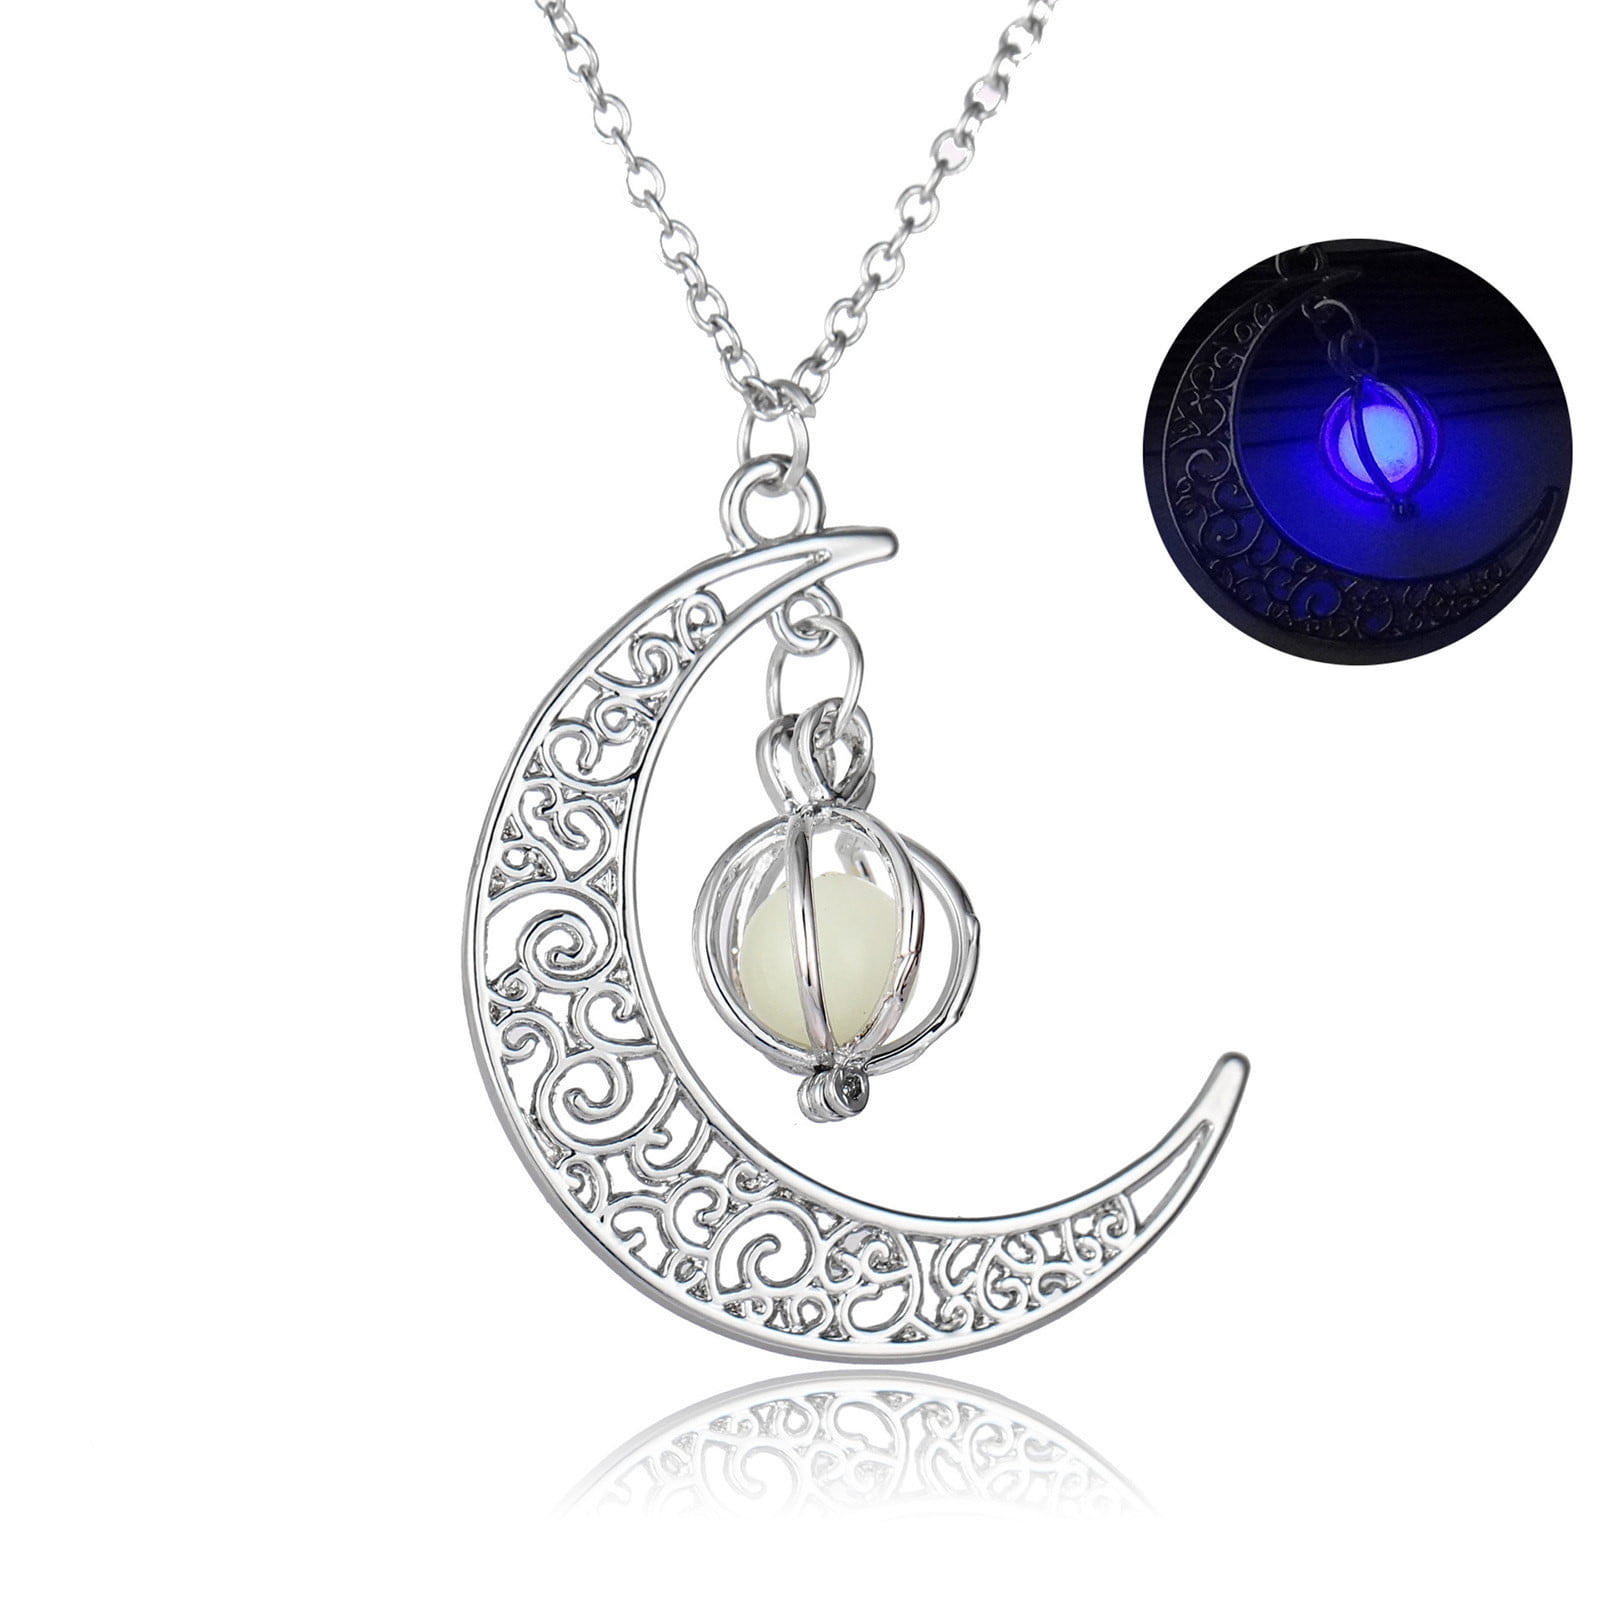 Moonglow - Charmed Simplicity Necklace – Crafted Decor